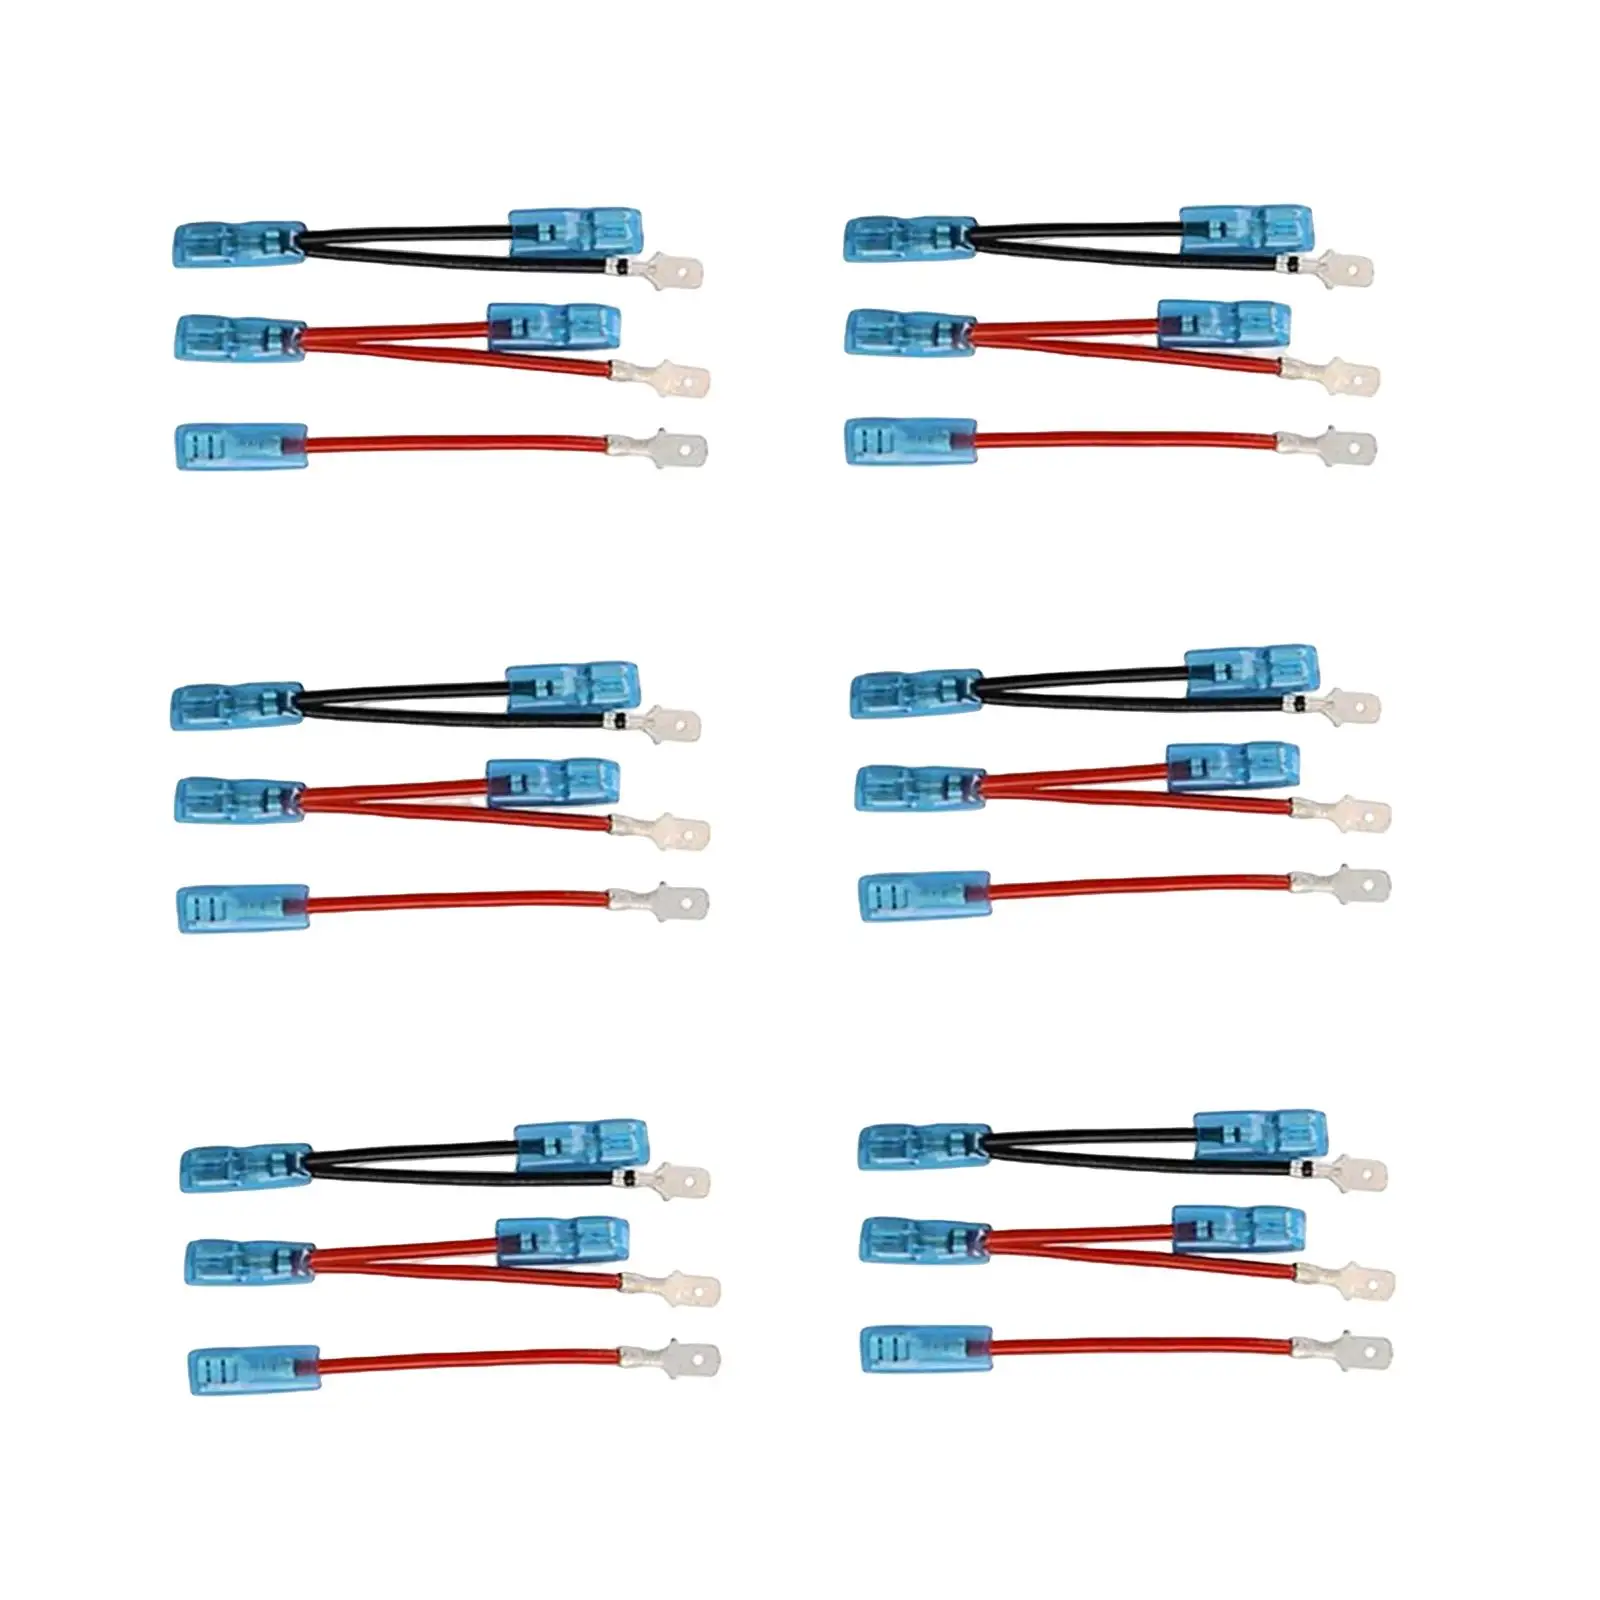 6 Pieces 5 Pin Rocker Switch Jumper Wires Set Accessories Easy to Install Replaces Spare Parts for Train Boat Marine Yachts